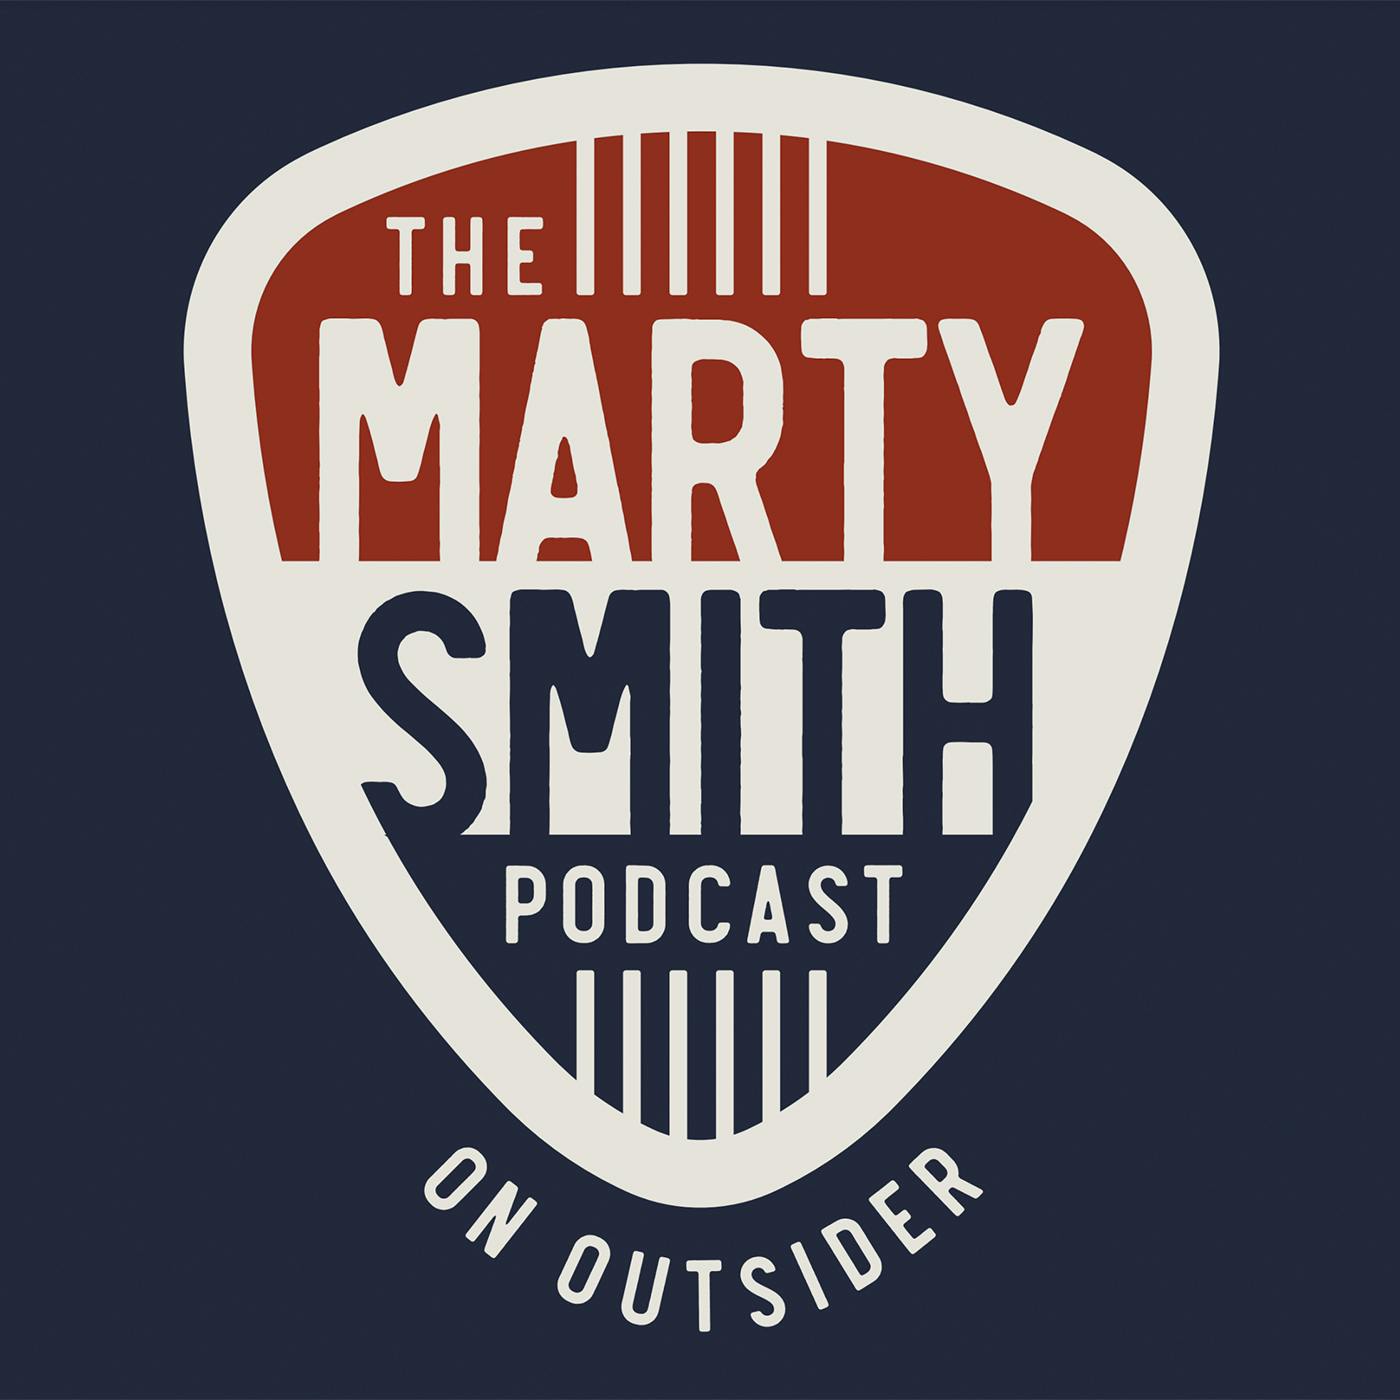 The Marty Smith Podcast on Outsider:outsiderpodcast